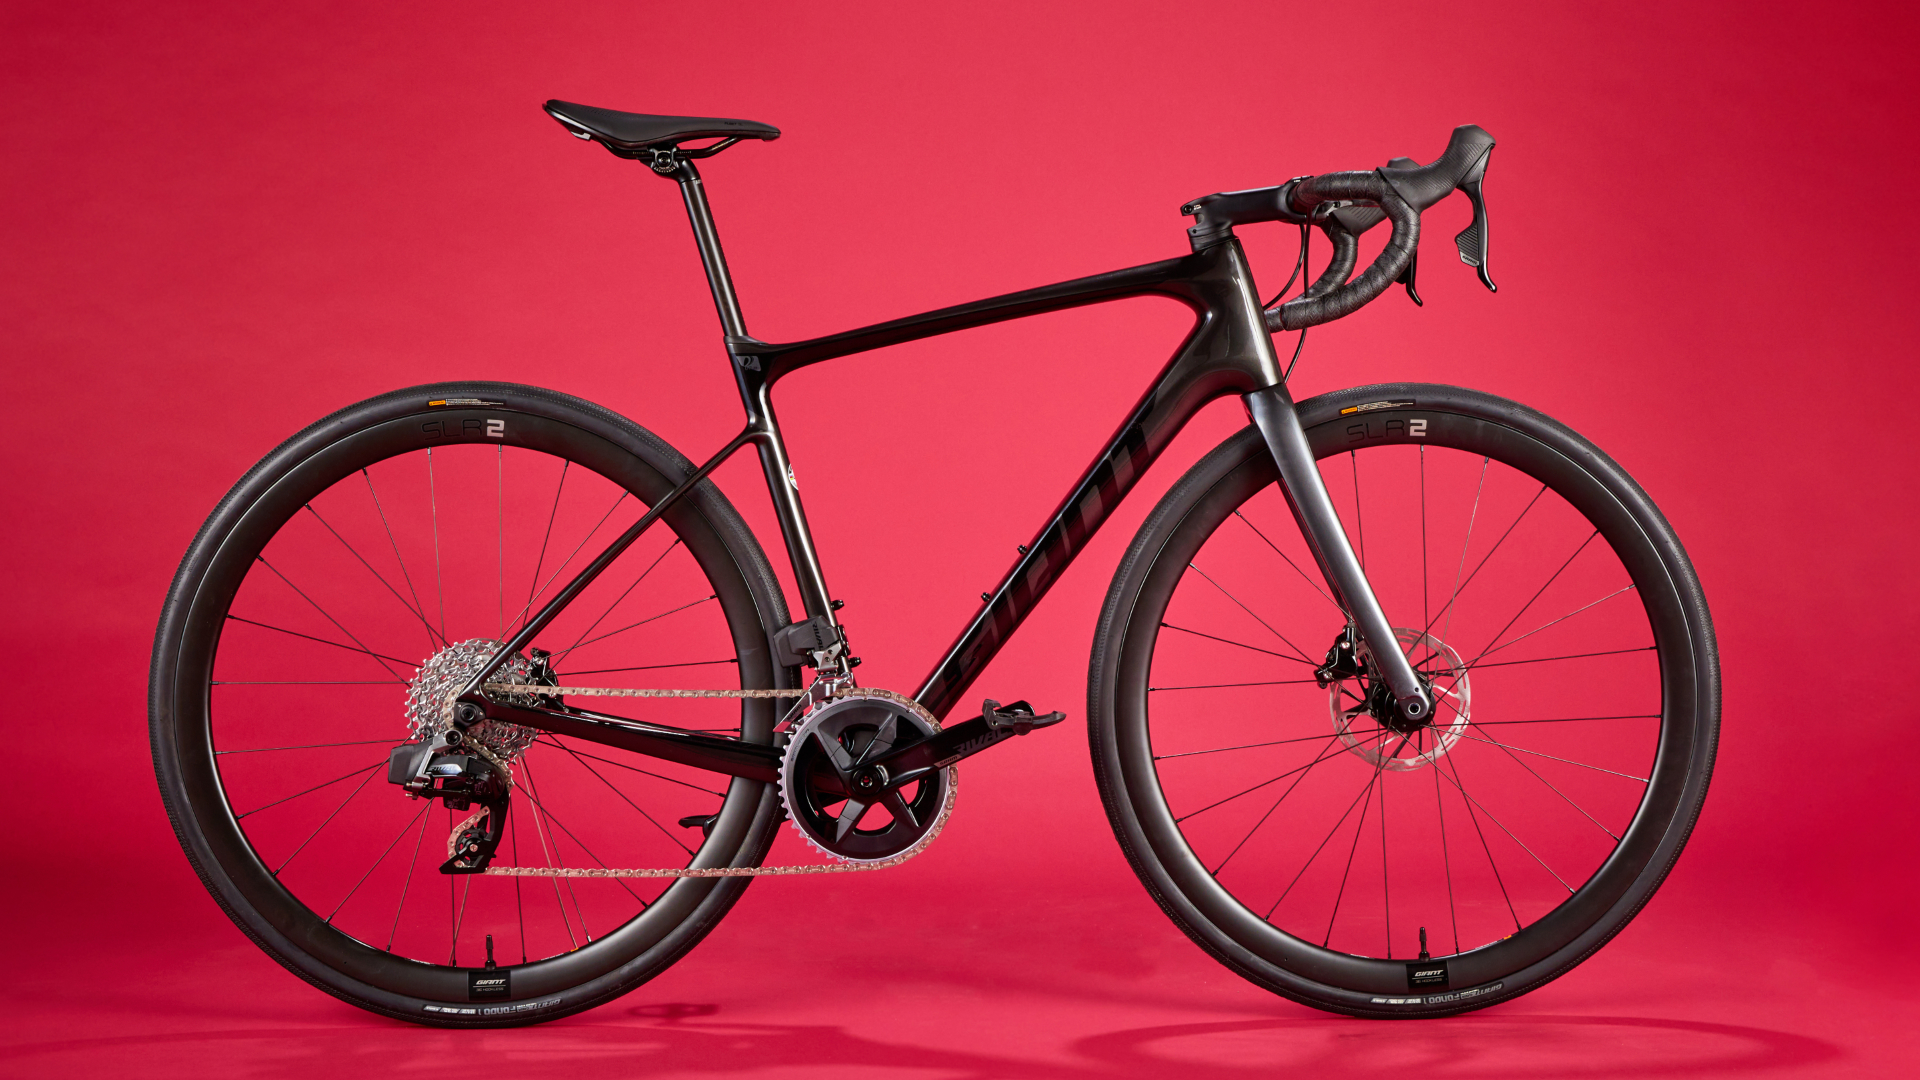 Giant Defy Advanced Pro AX | Weekly